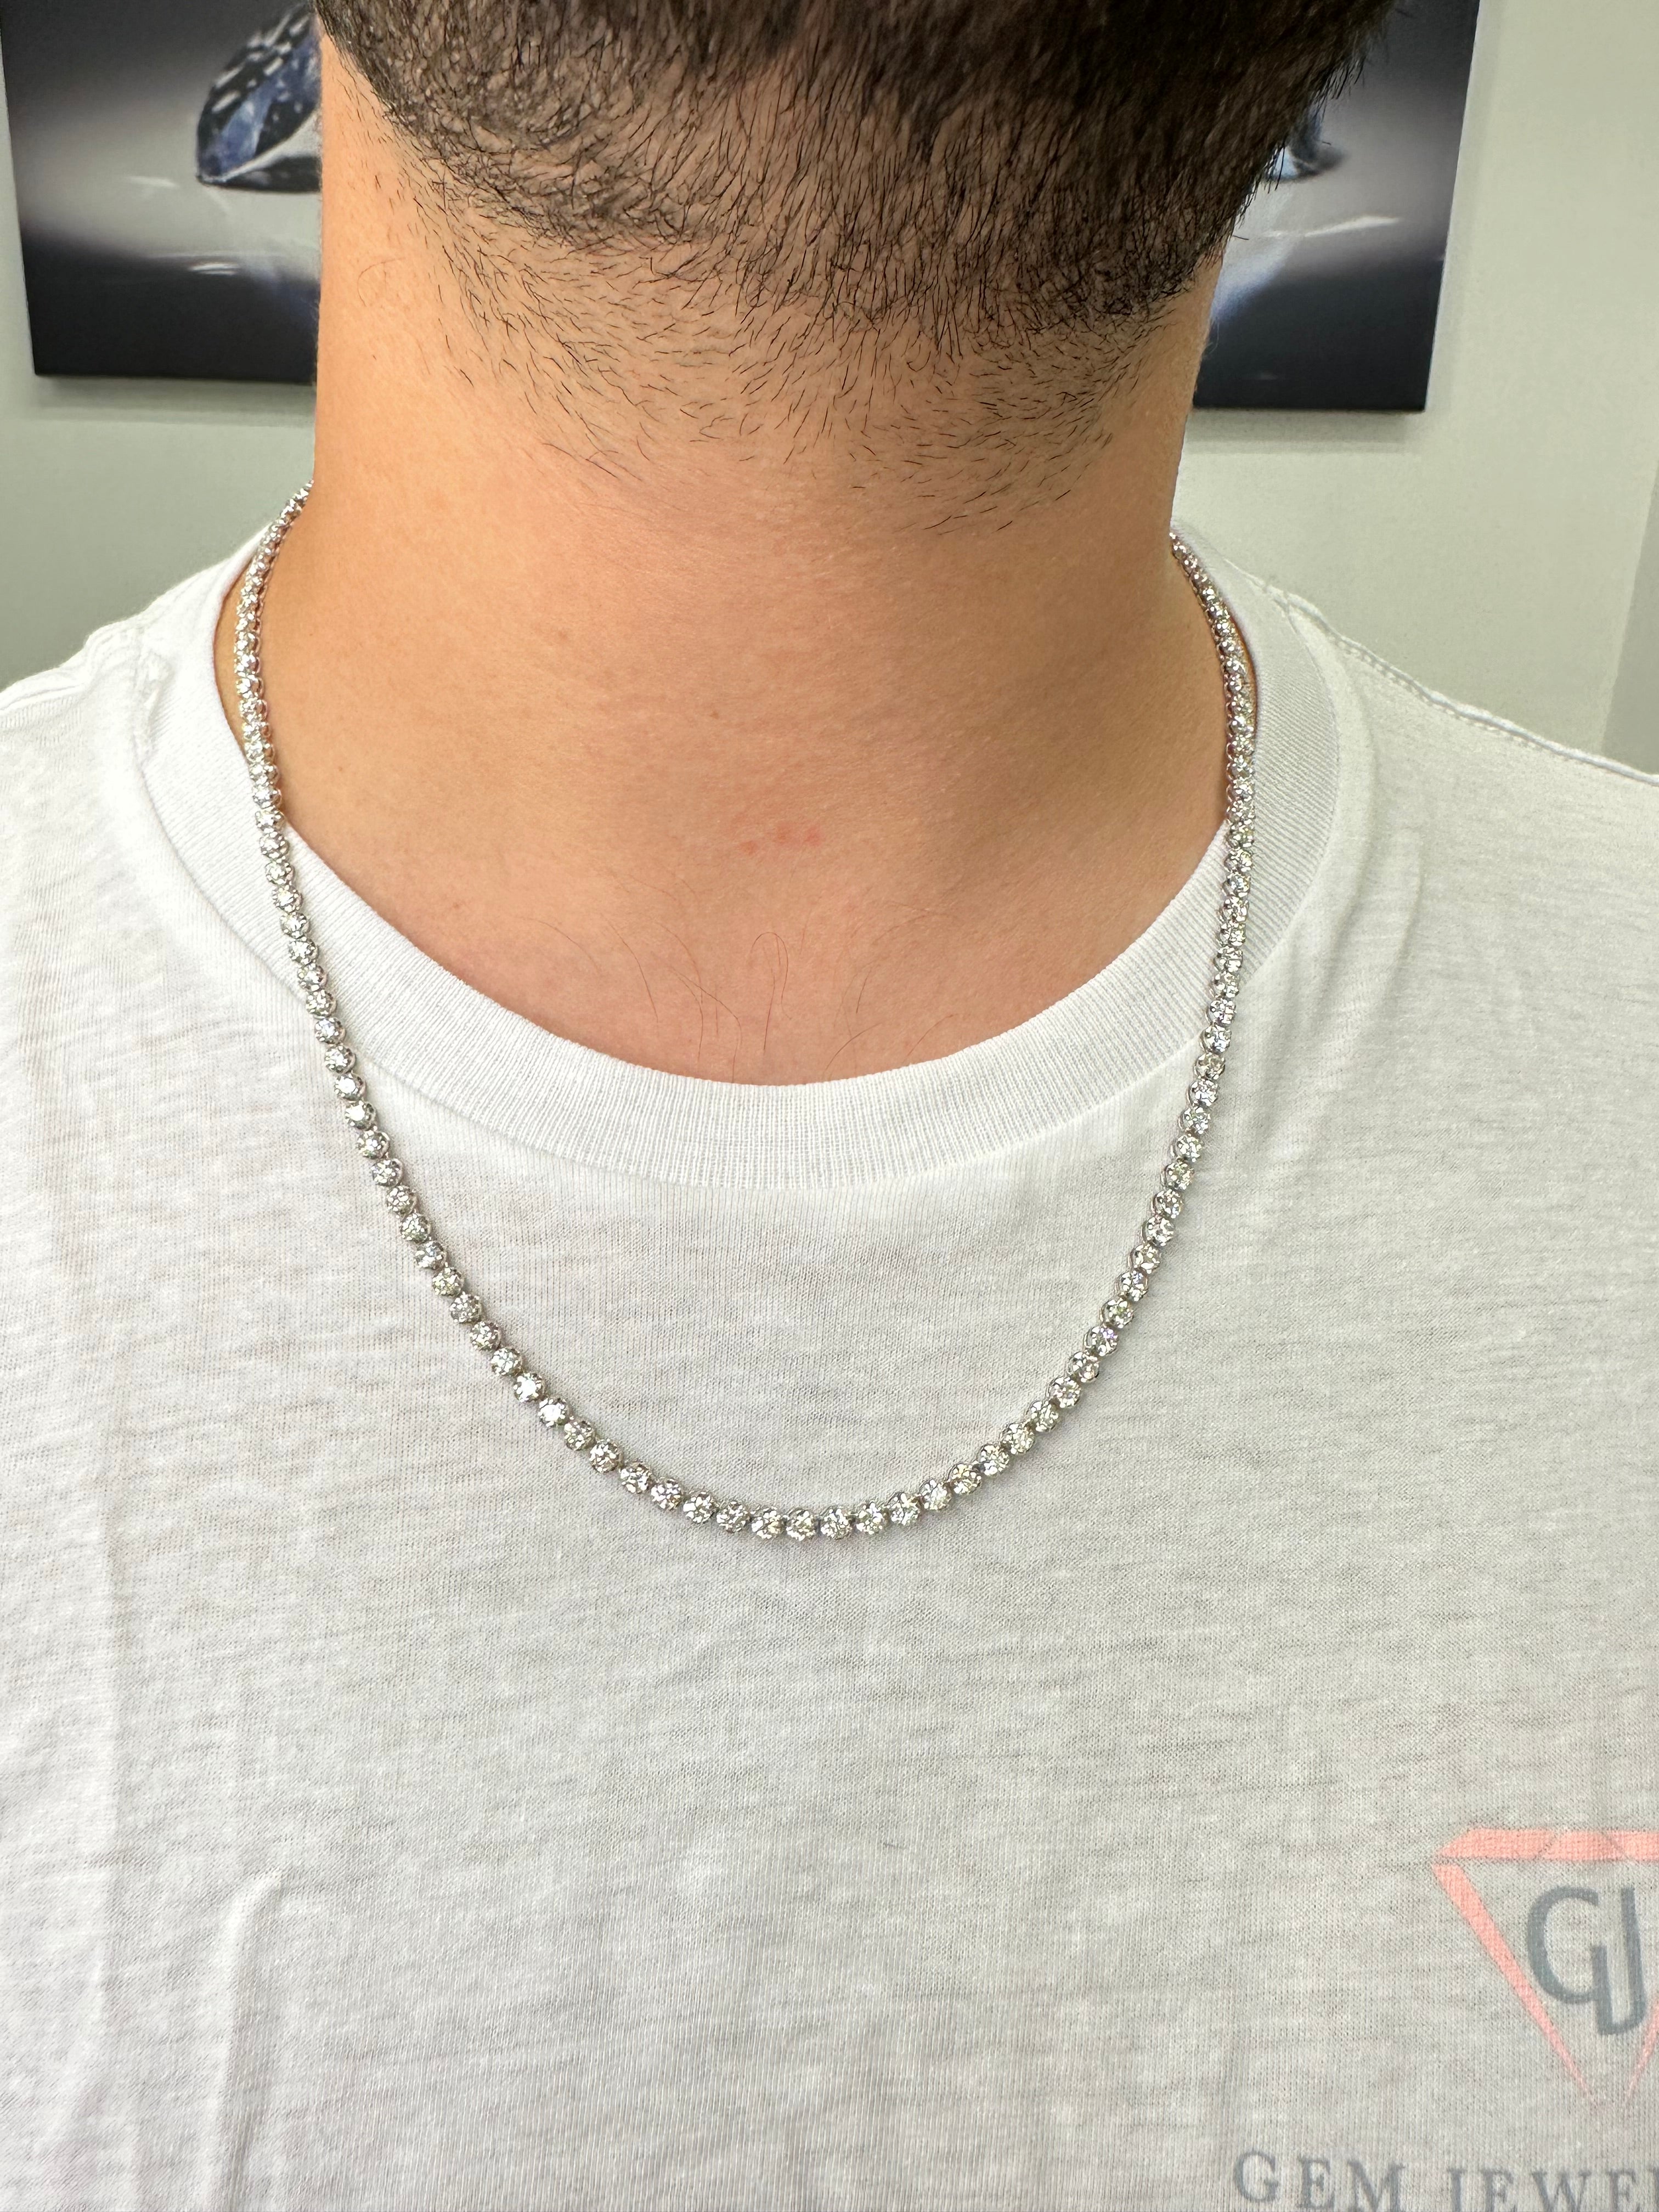 NIV'S BLING - 4mm Lab Diamond Tennis Chain for Men and Women | 18k Gold  Plated 1 Row Cubic Zirconia Hip Hop Jewelry Necklace | Amazon.com